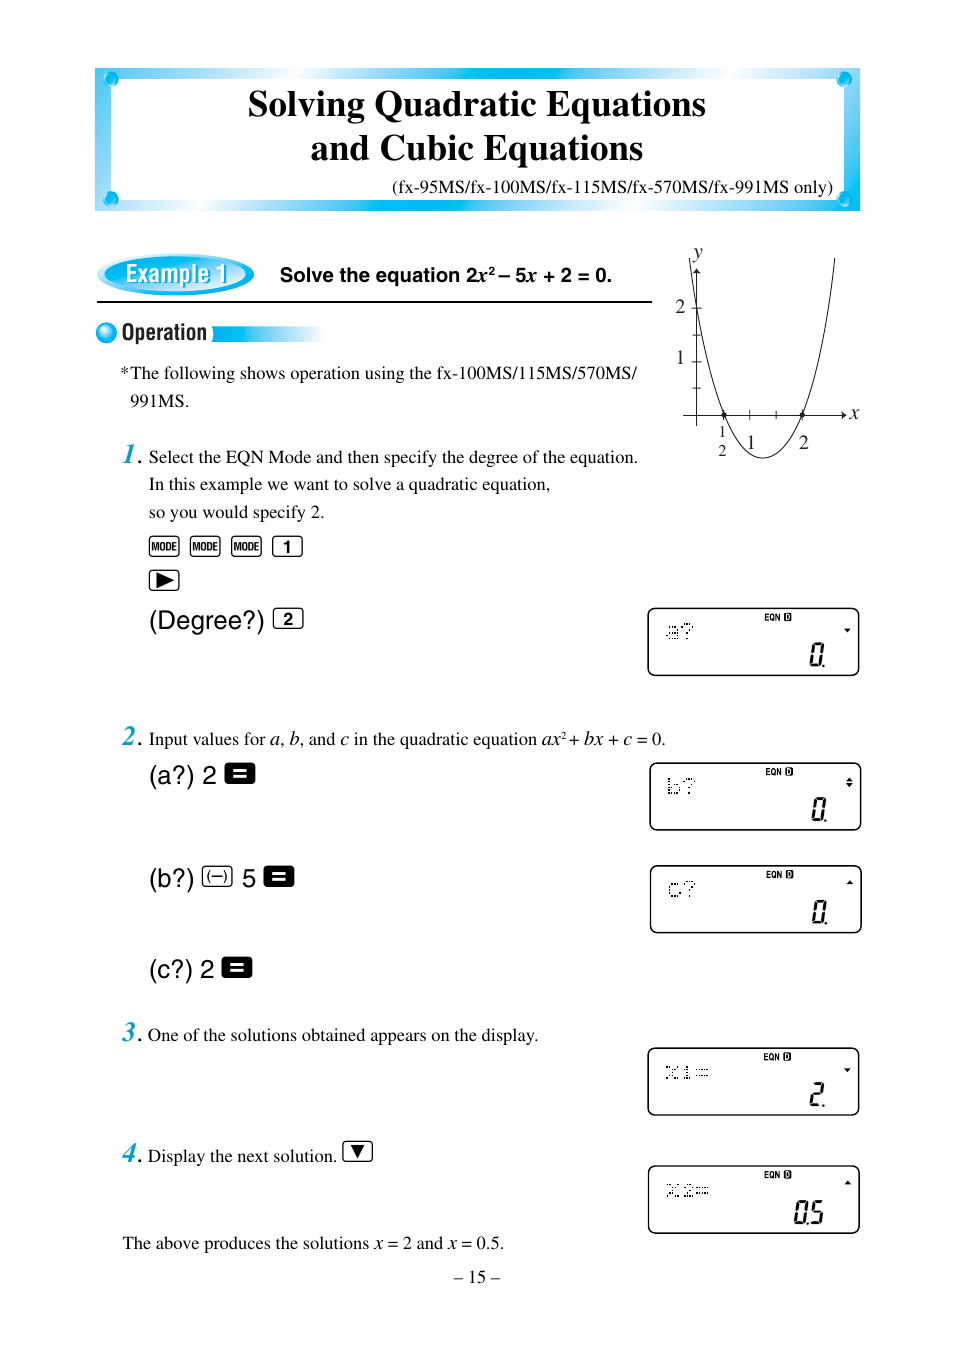 Solving quadratic equations and cubic equations, F f f 1 r | Casio fx-570MS  User Manual | Page 18 / 46